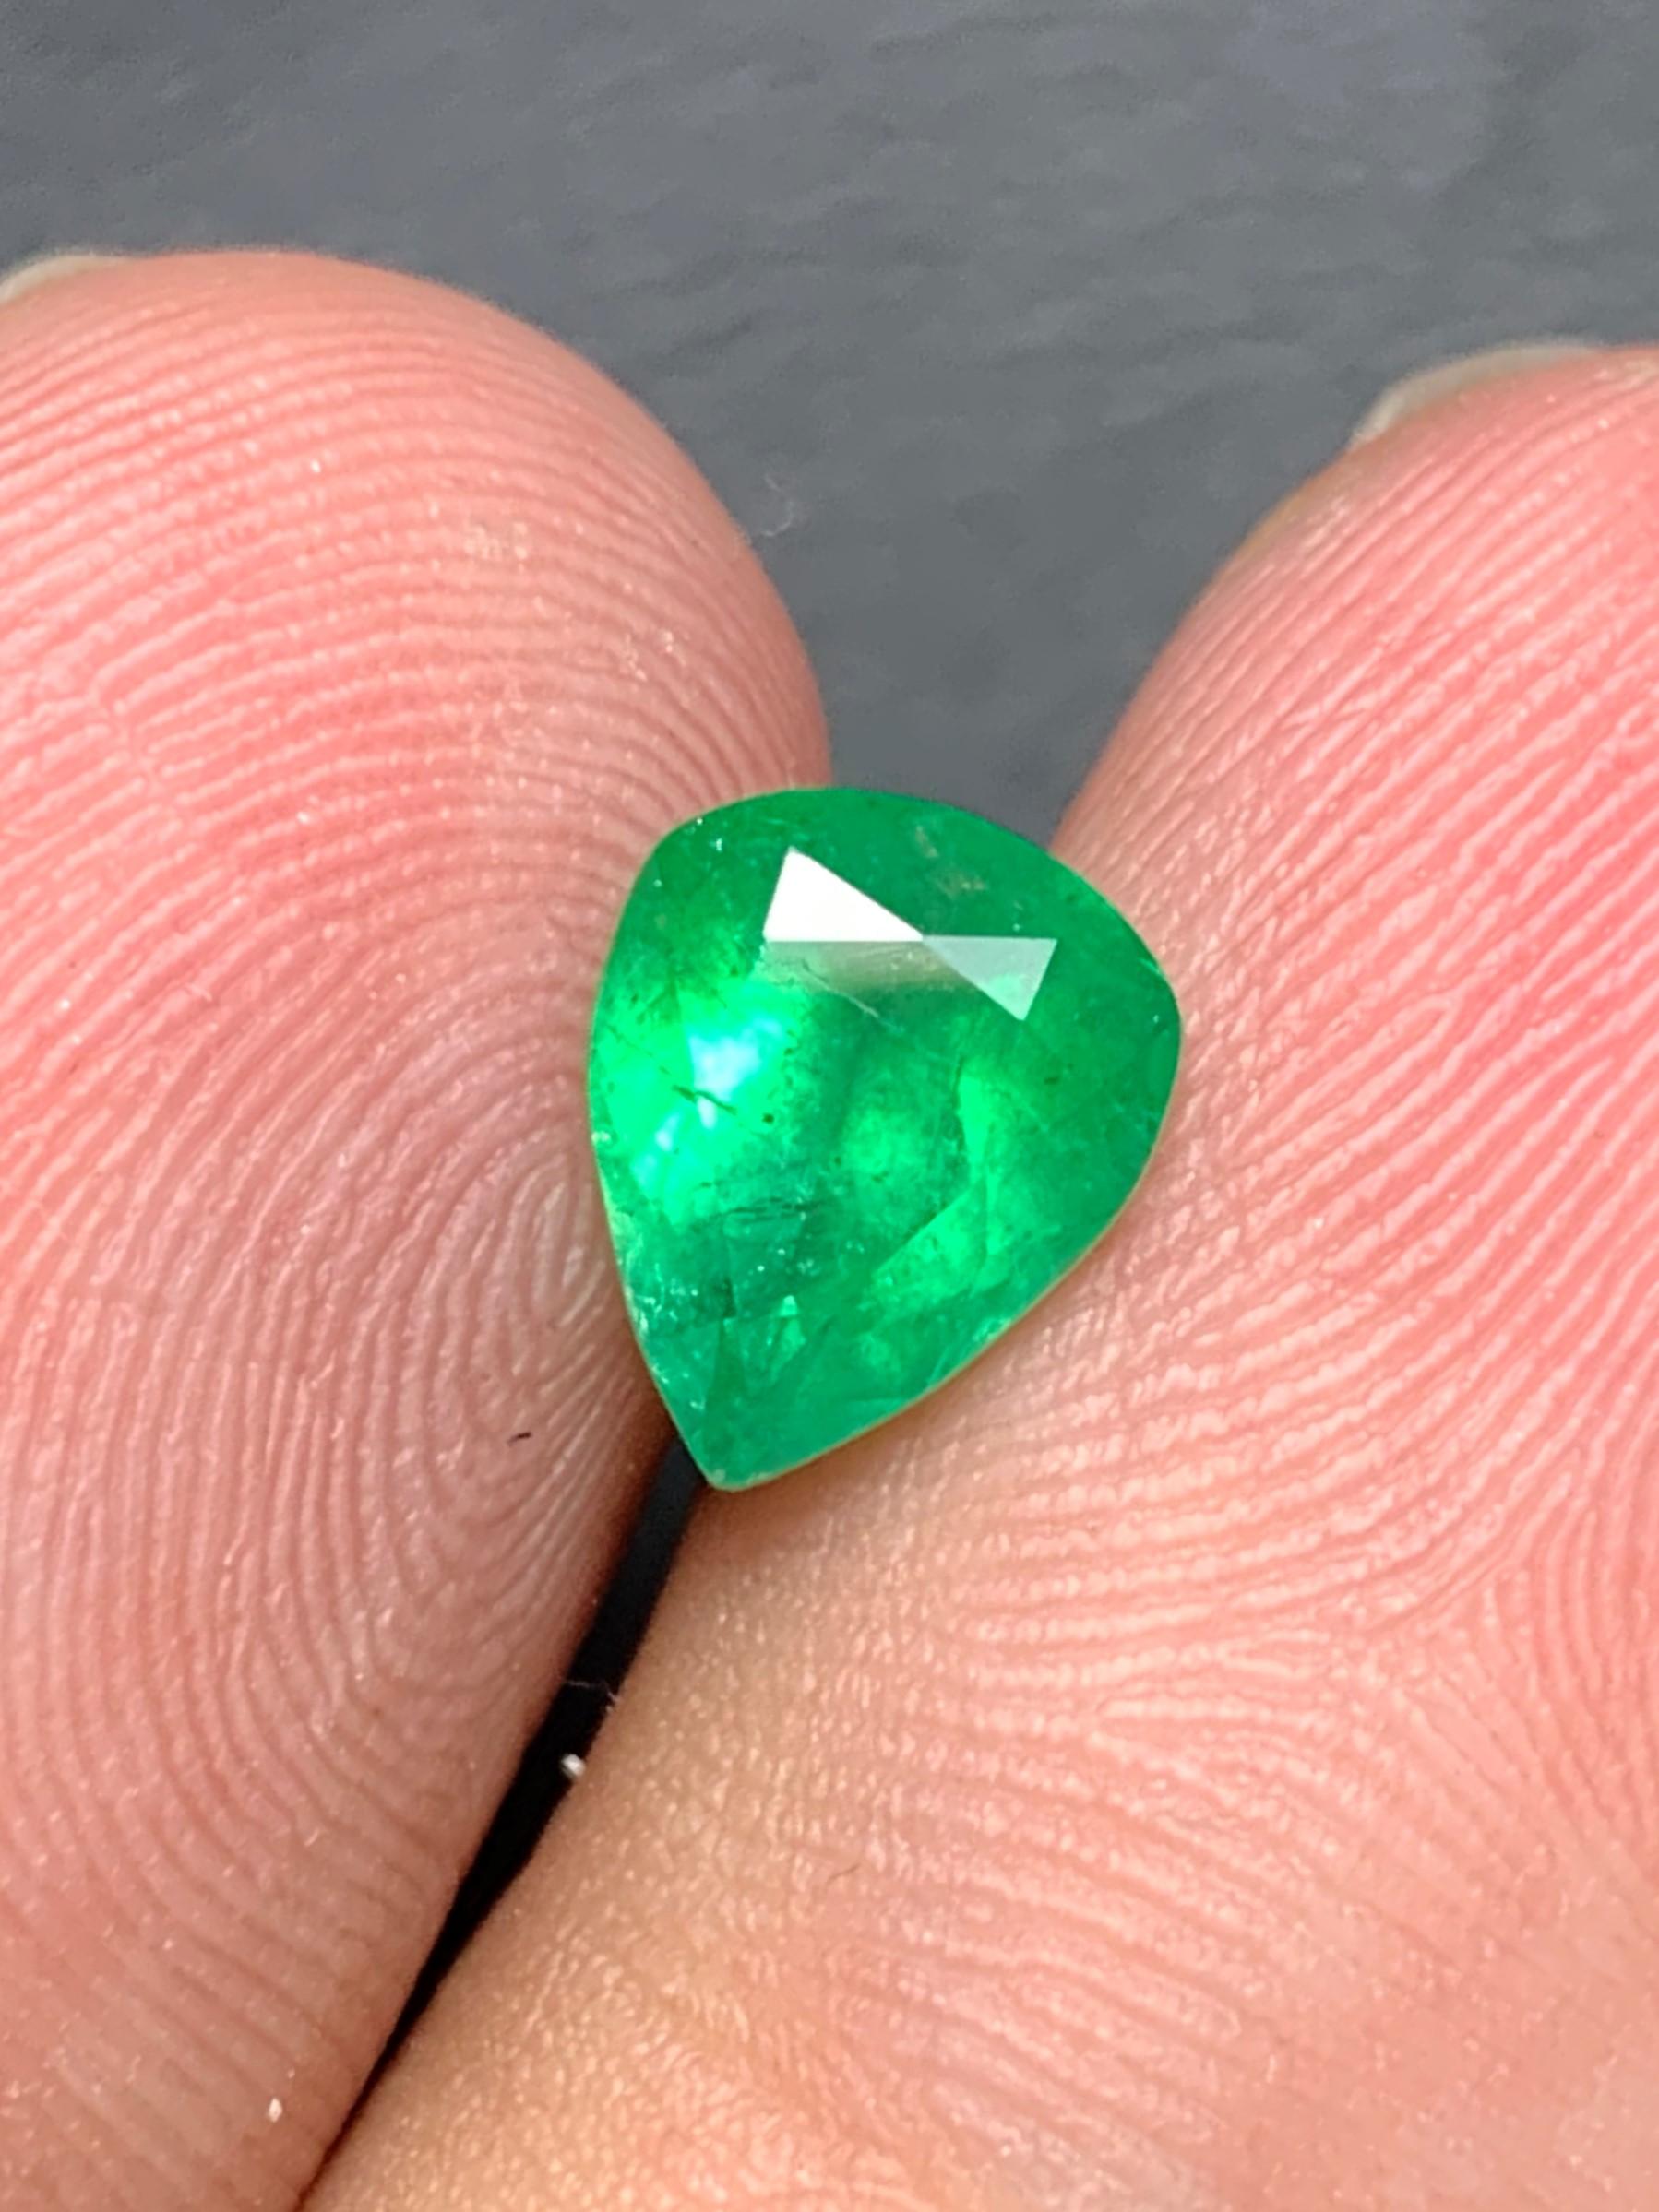 Loose Emerald
Weight: 1.50 Carats
Dimension: 8.6x7.1x5 Mm
Origin: Swat Pakistan Mine
Shape: Pear
Treatment: Non
Certificate: On Demand
.
Wearing an emerald gives strength to the planet Mercury located in the person's horoscope. It enhances the